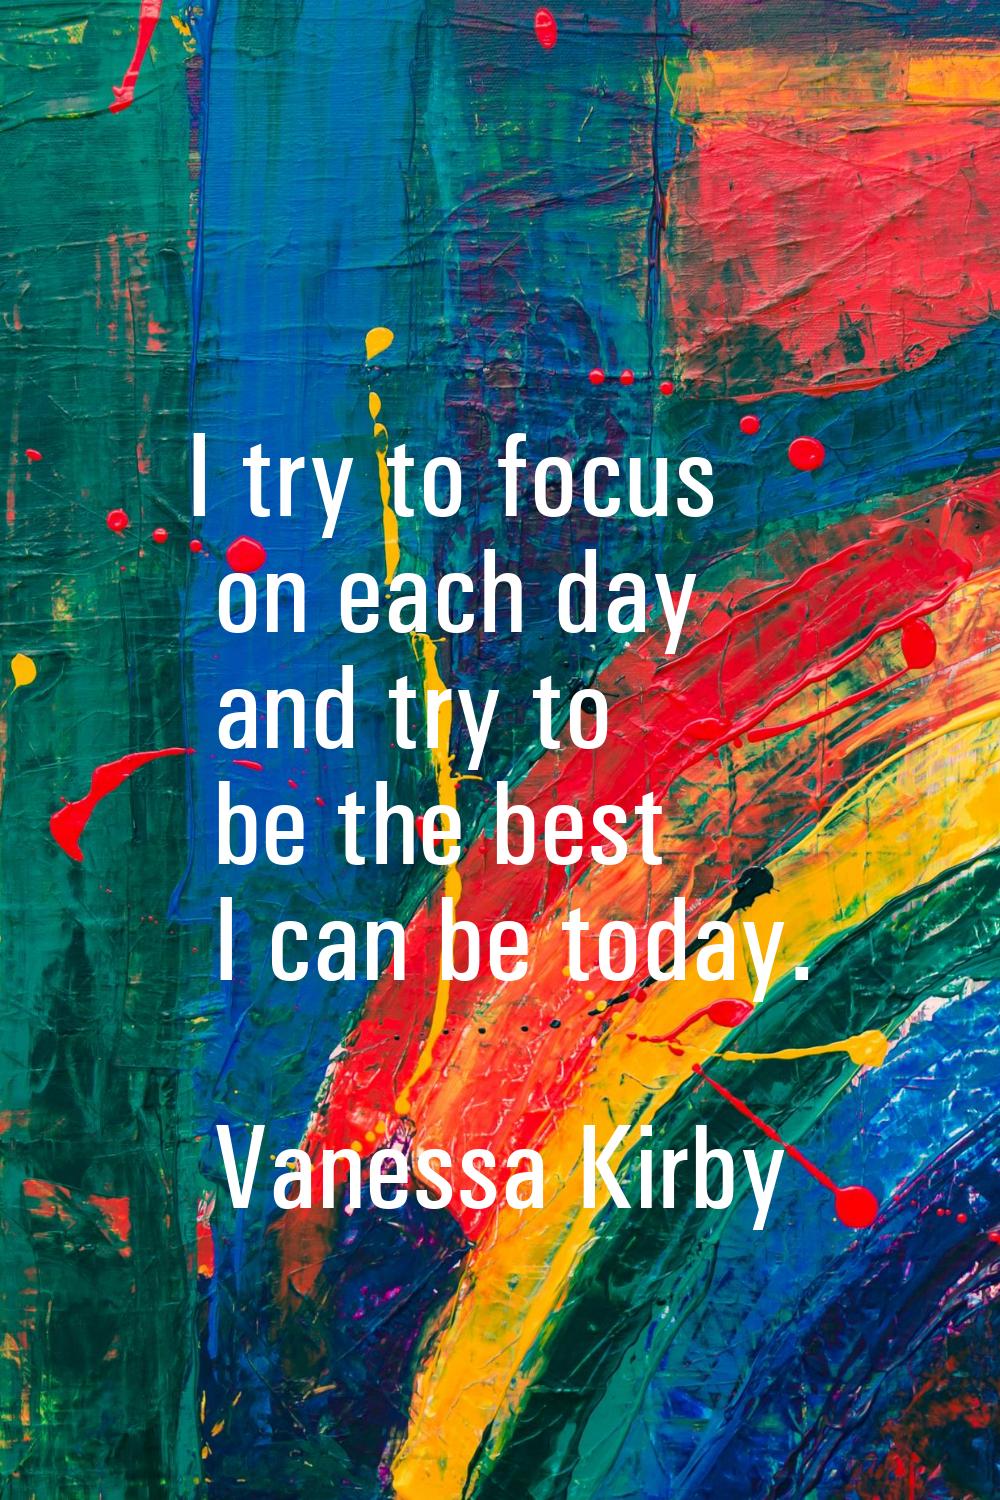 I try to focus on each day and try to be the best I can be today.